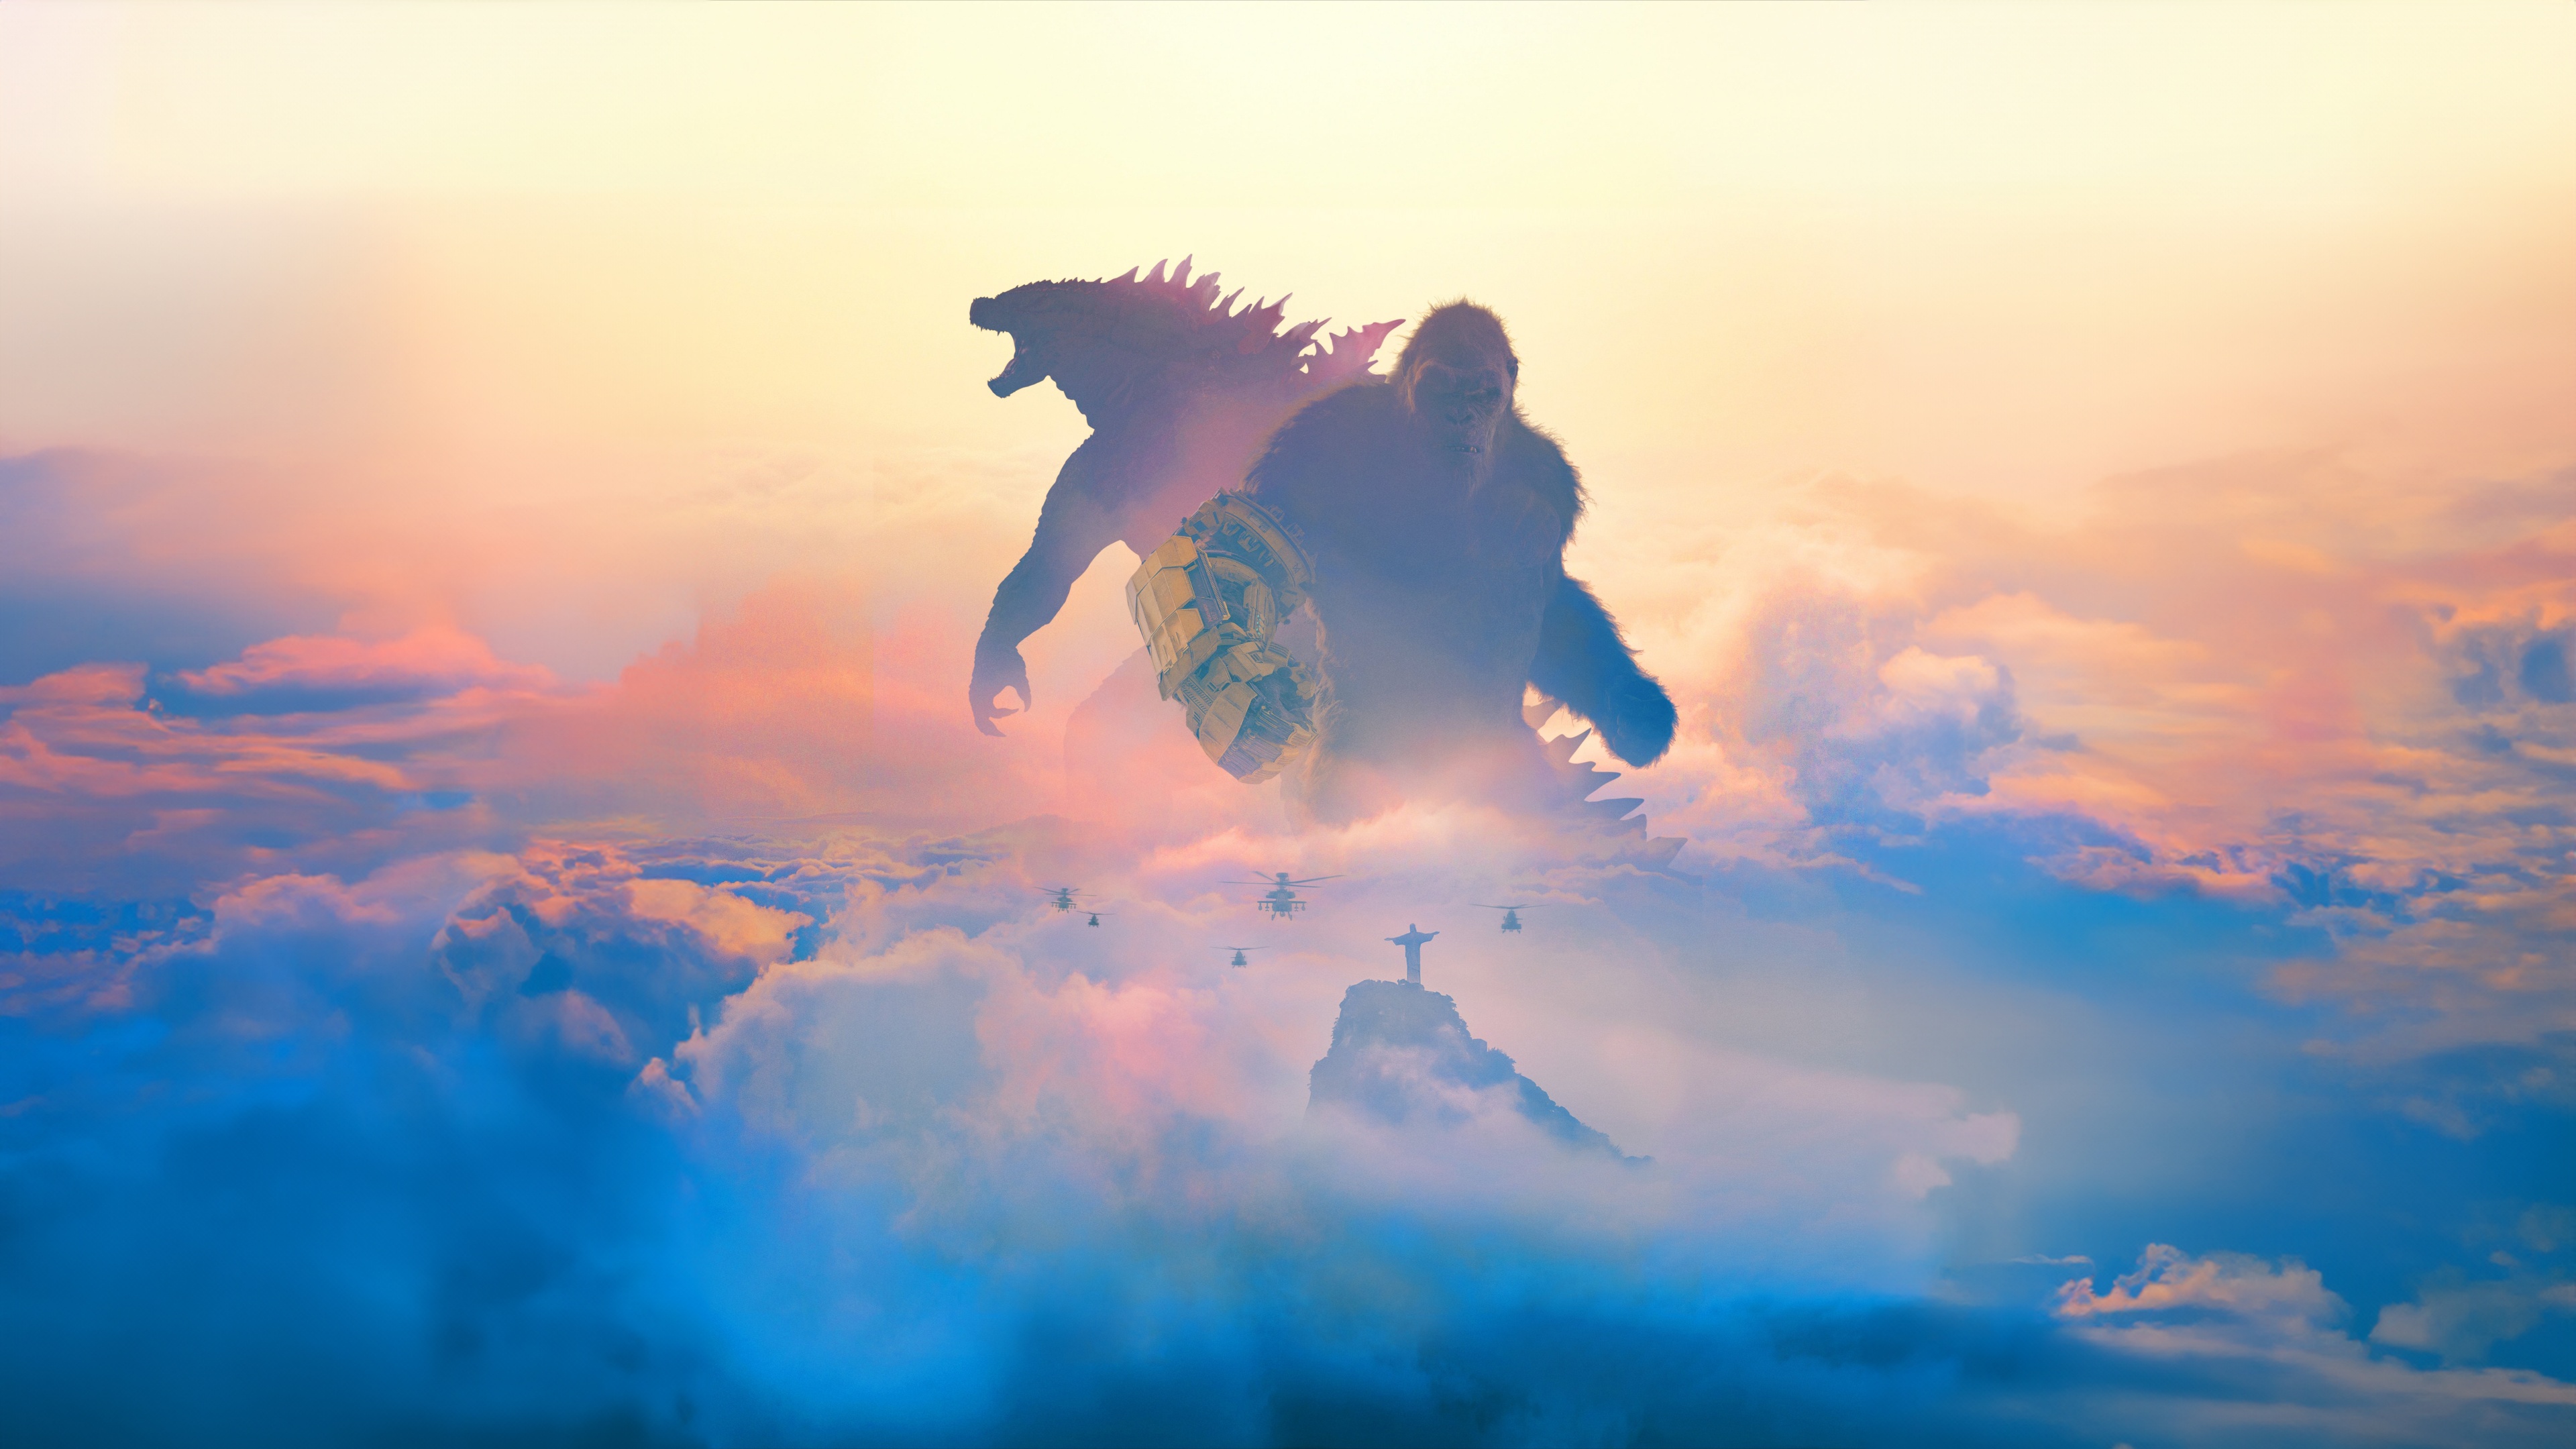 Godzilla x Kong: The New Empire wallpaper Resolution 3840x2160 | Best Download this awesome wallpaper - Cool Wallpaper HD - CoolWallpaper-HD.com